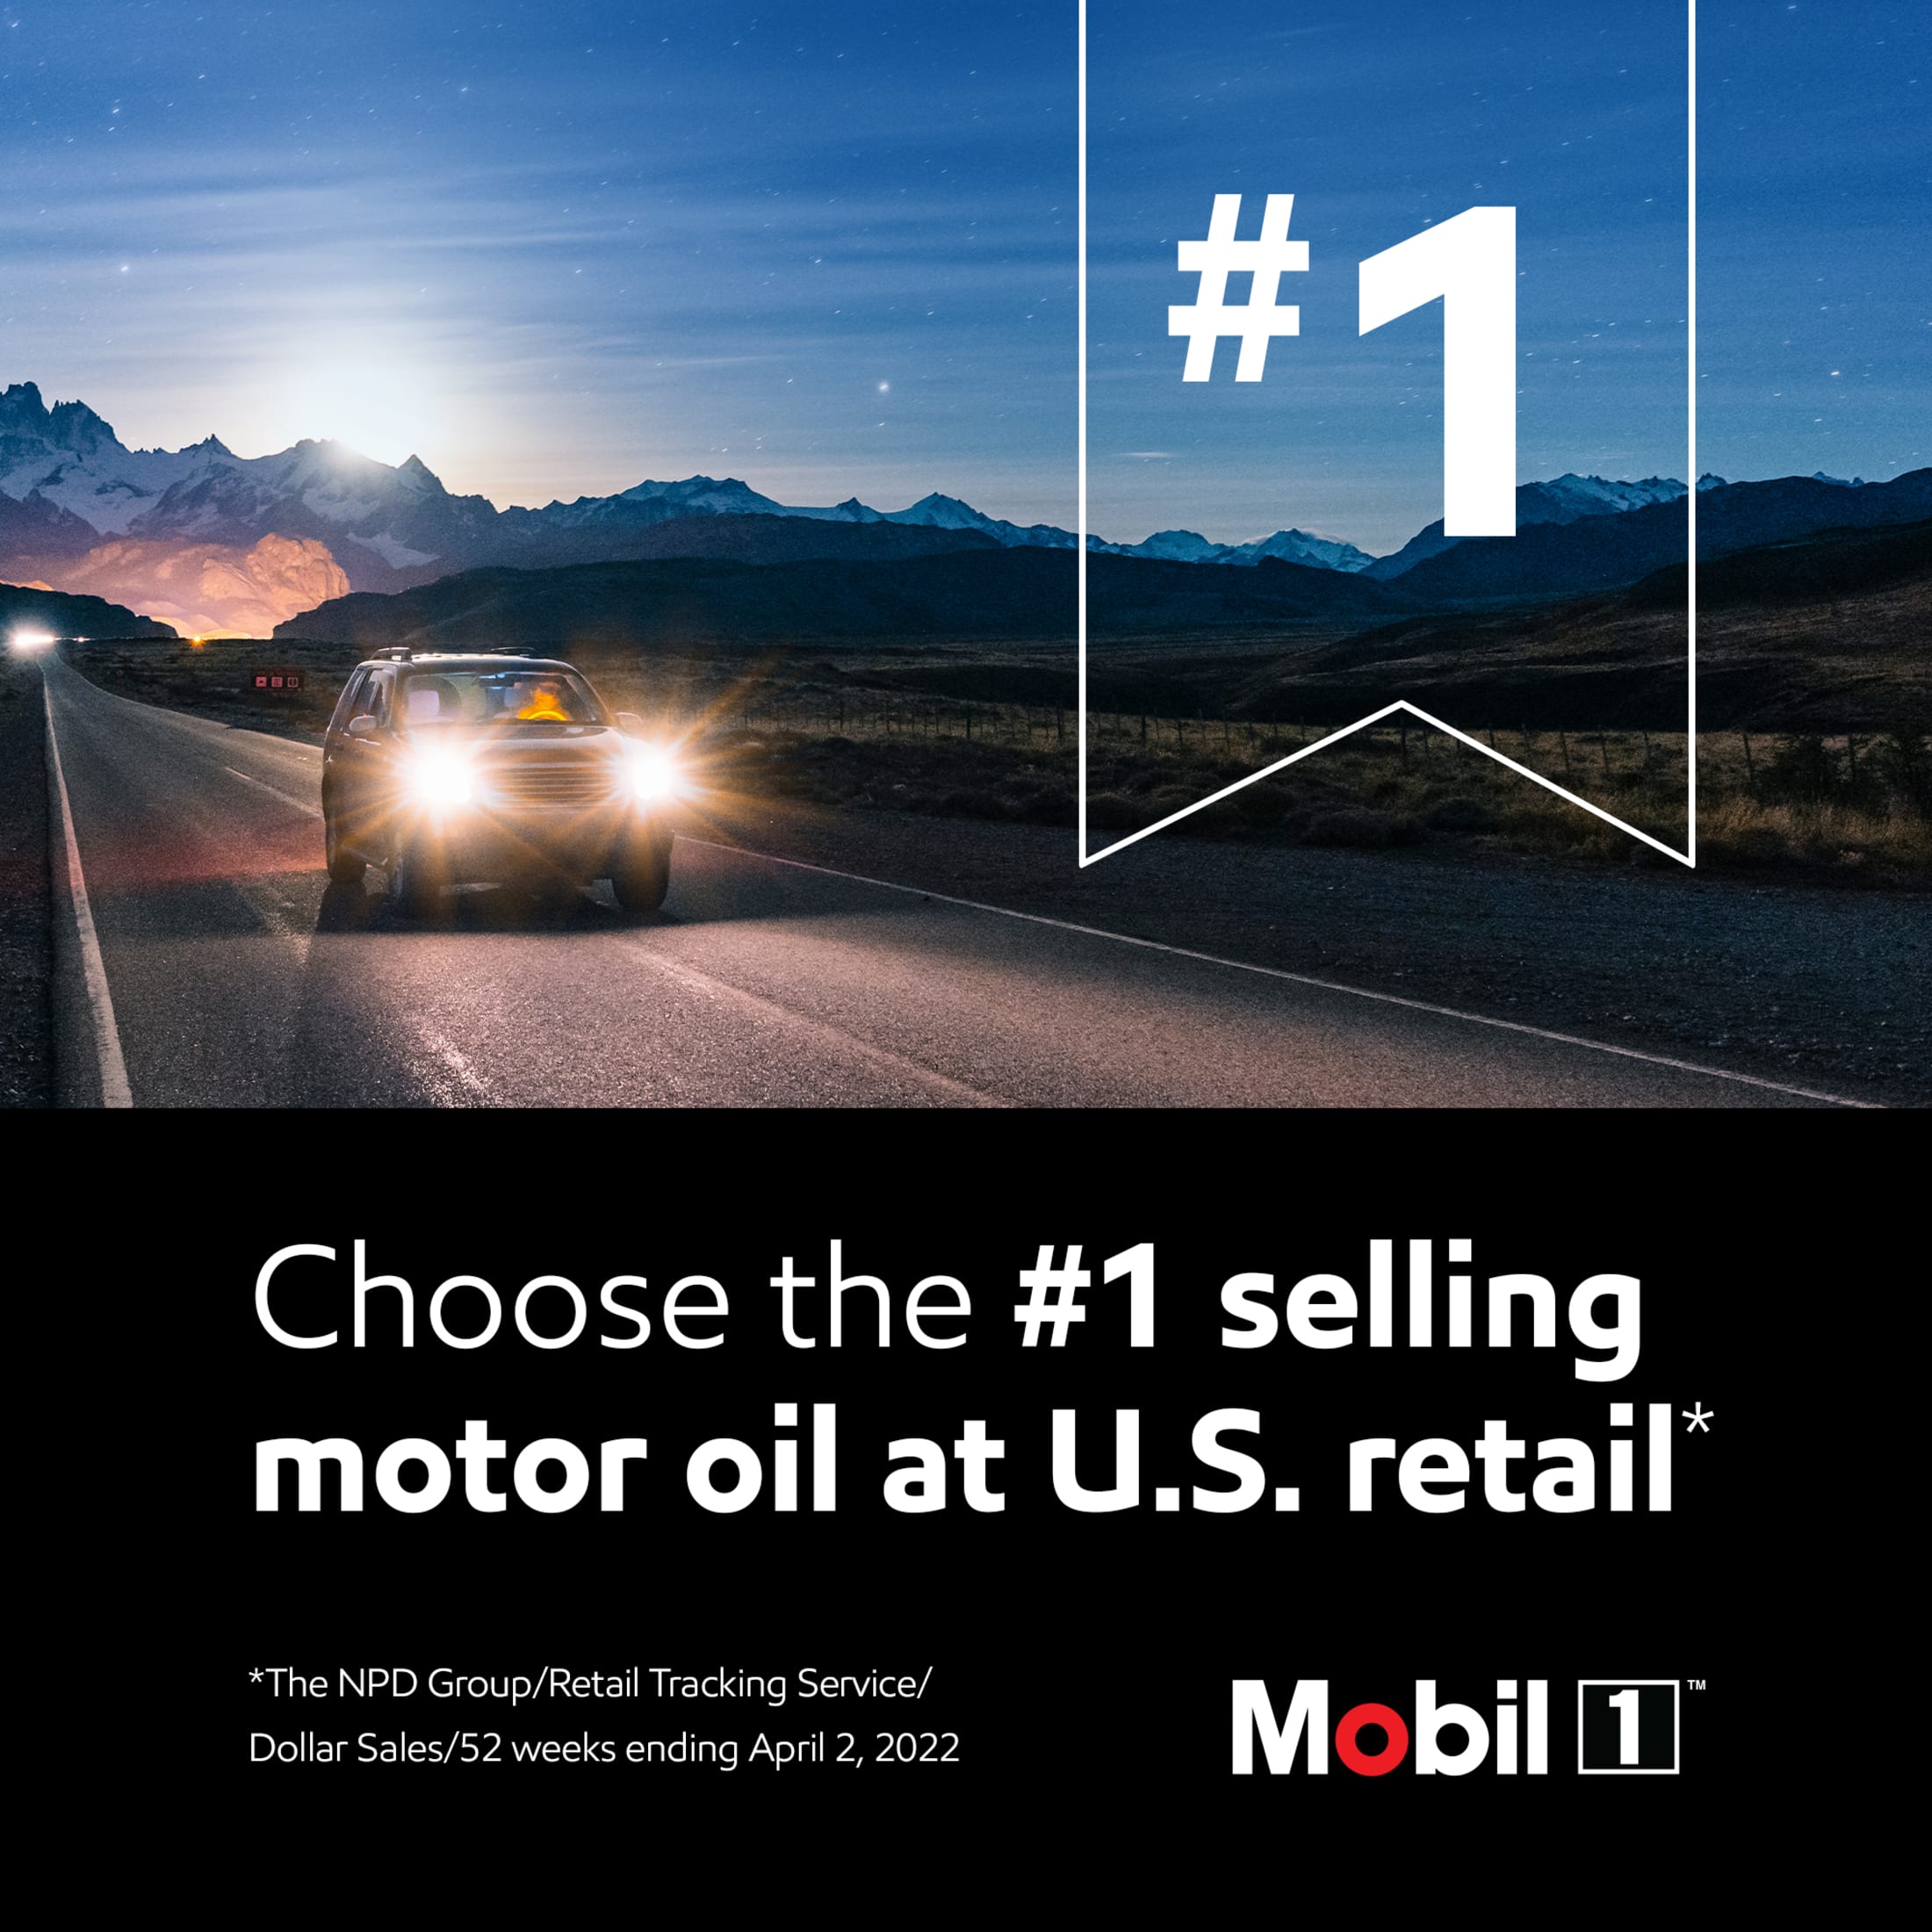 Mobil 1 High Mileage Full Synthetic Motor Oil 10W-40, 5 Quart - image 5 of 9